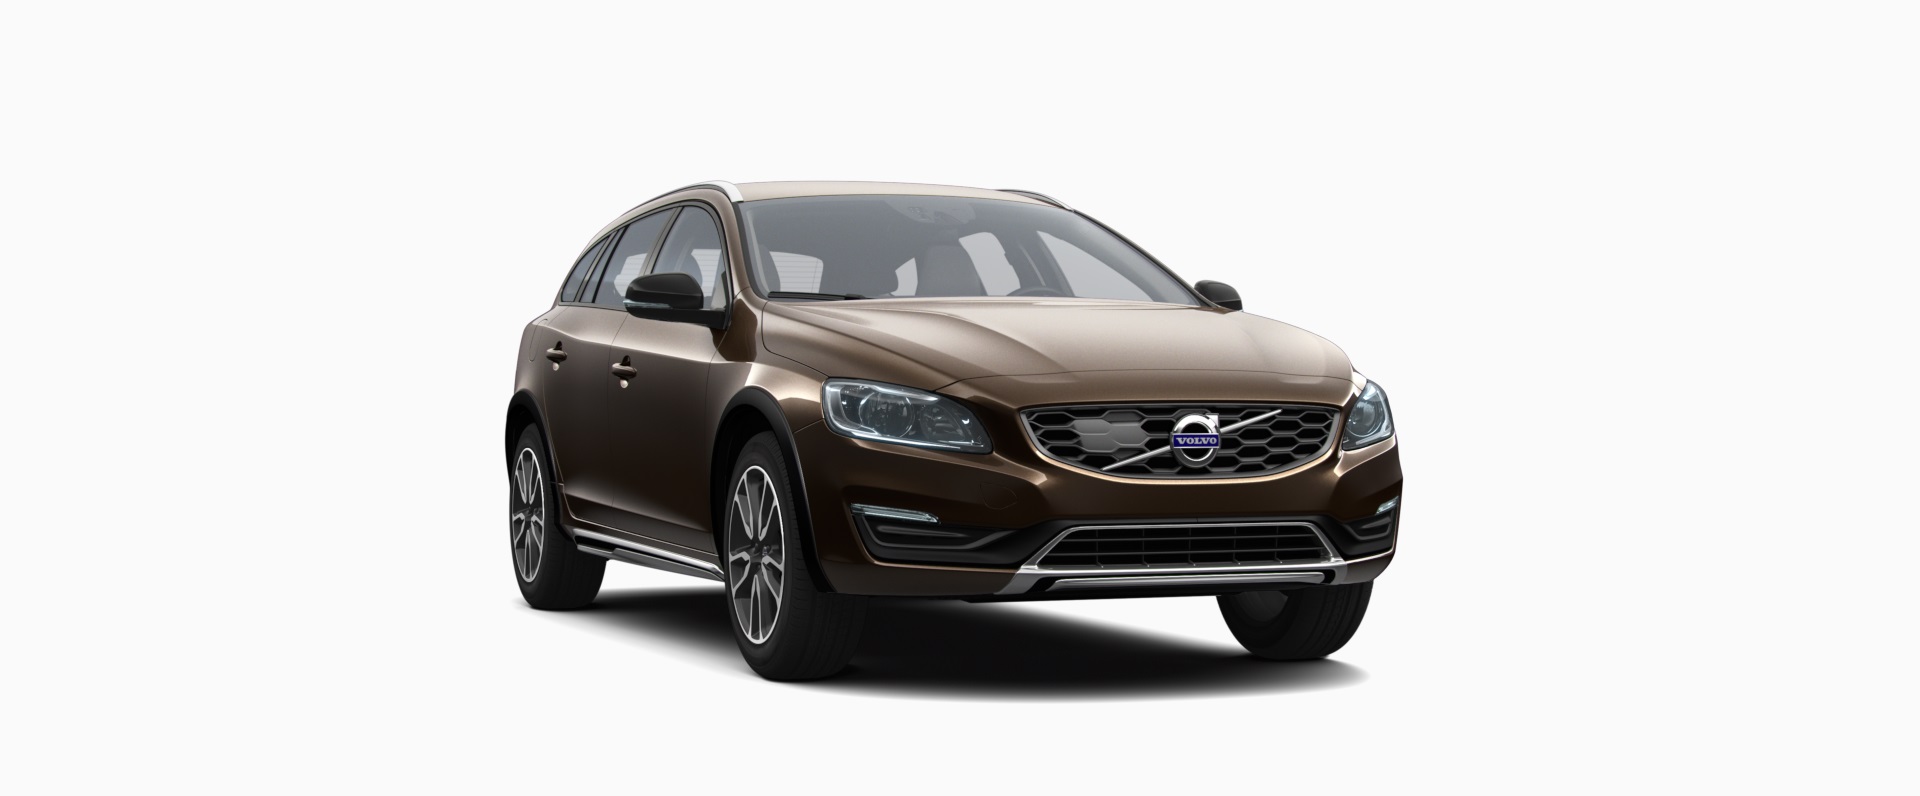 Volvo V60 Cross Country T5 AWD front cross view